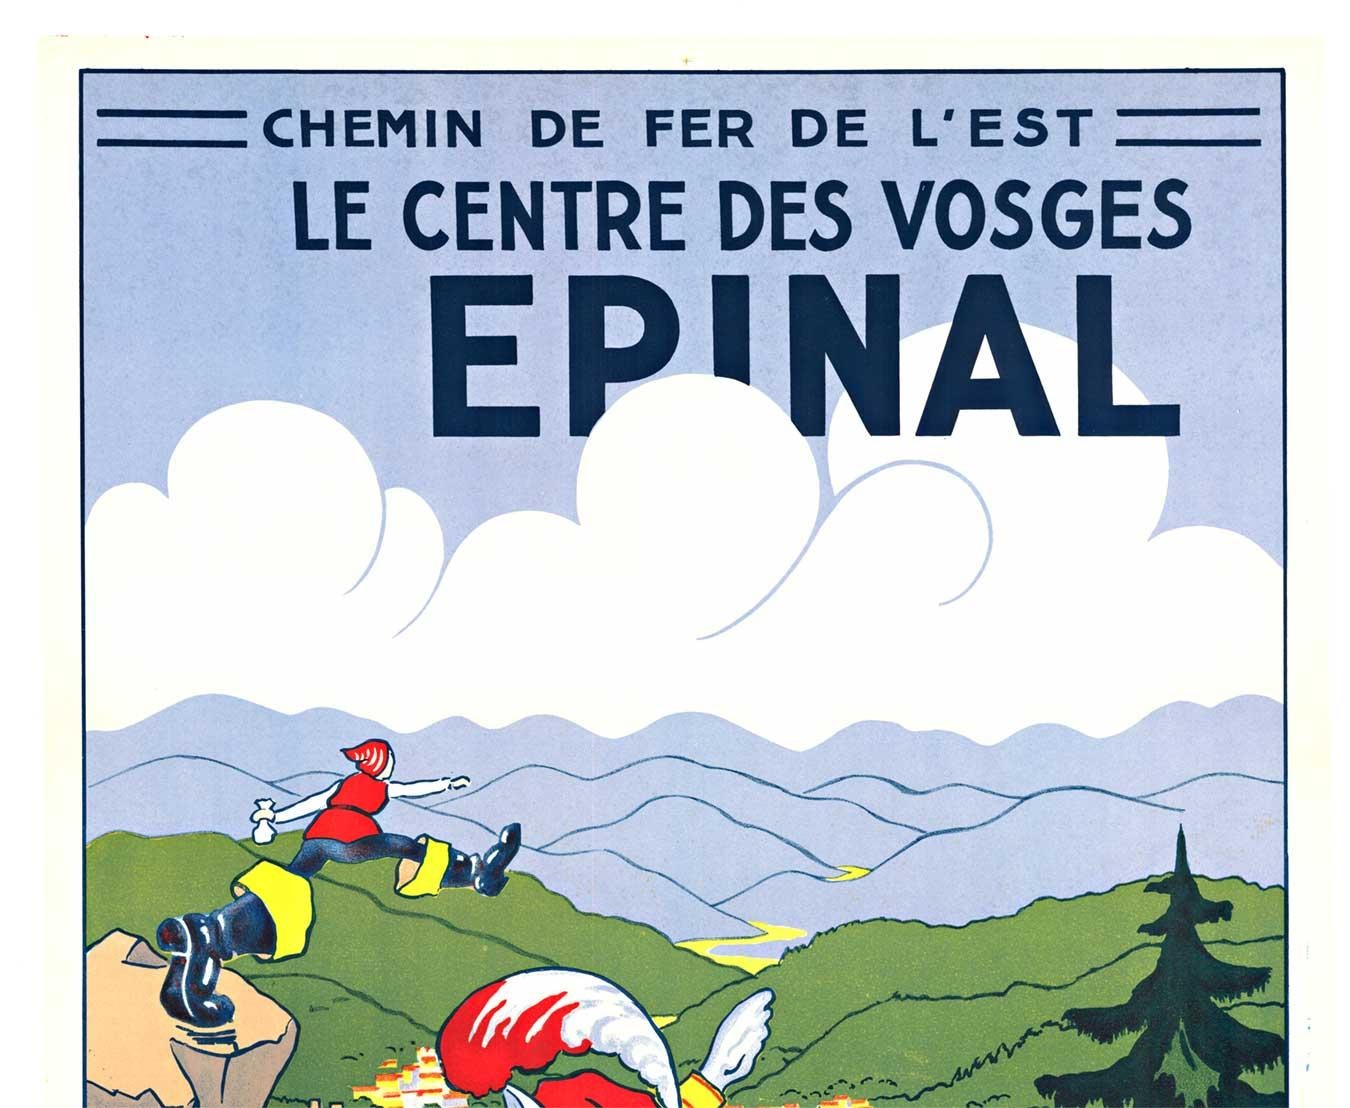 Original French travel poster:  EPINAL. Chemin de Fer de l’Est.  Excellent condition.  No repairs, no damage, linen backed, A condition.   Bright and colorful full lithograph.

Linen-backed vintage travel poster by the French railway Chemin de Fer